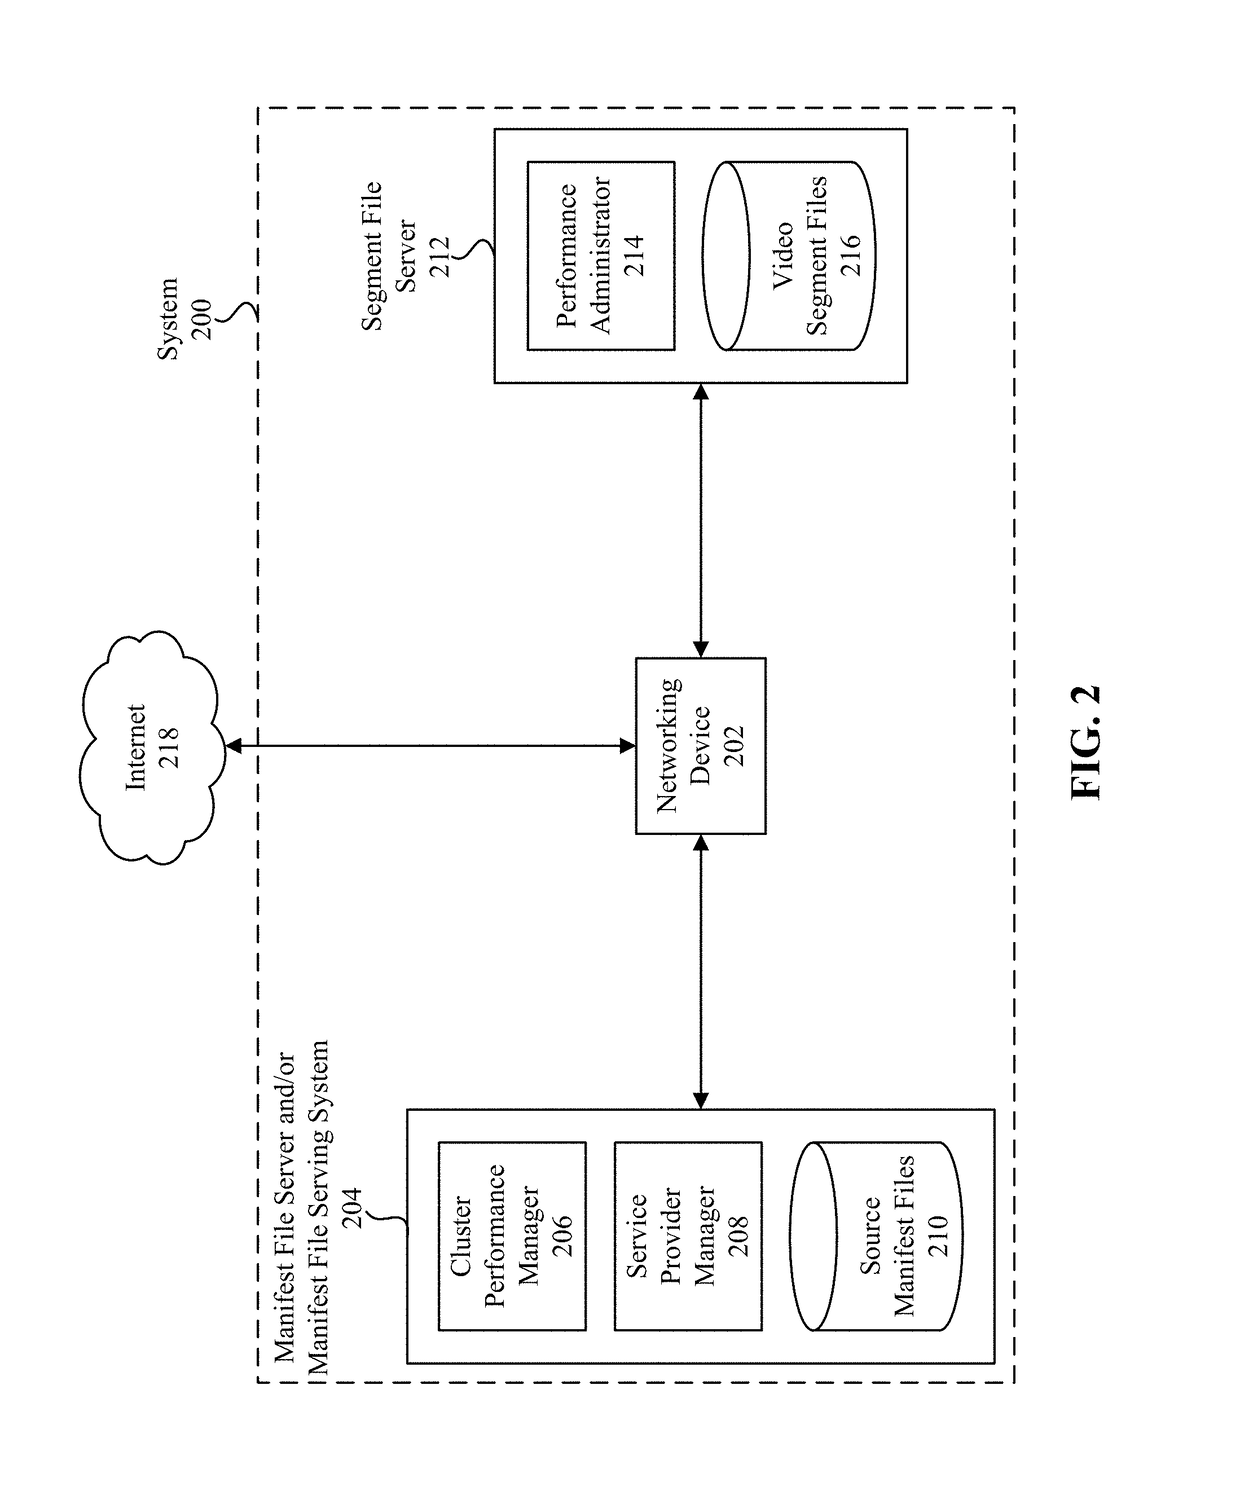 Generating and using manifest files including content delivery network authentication data